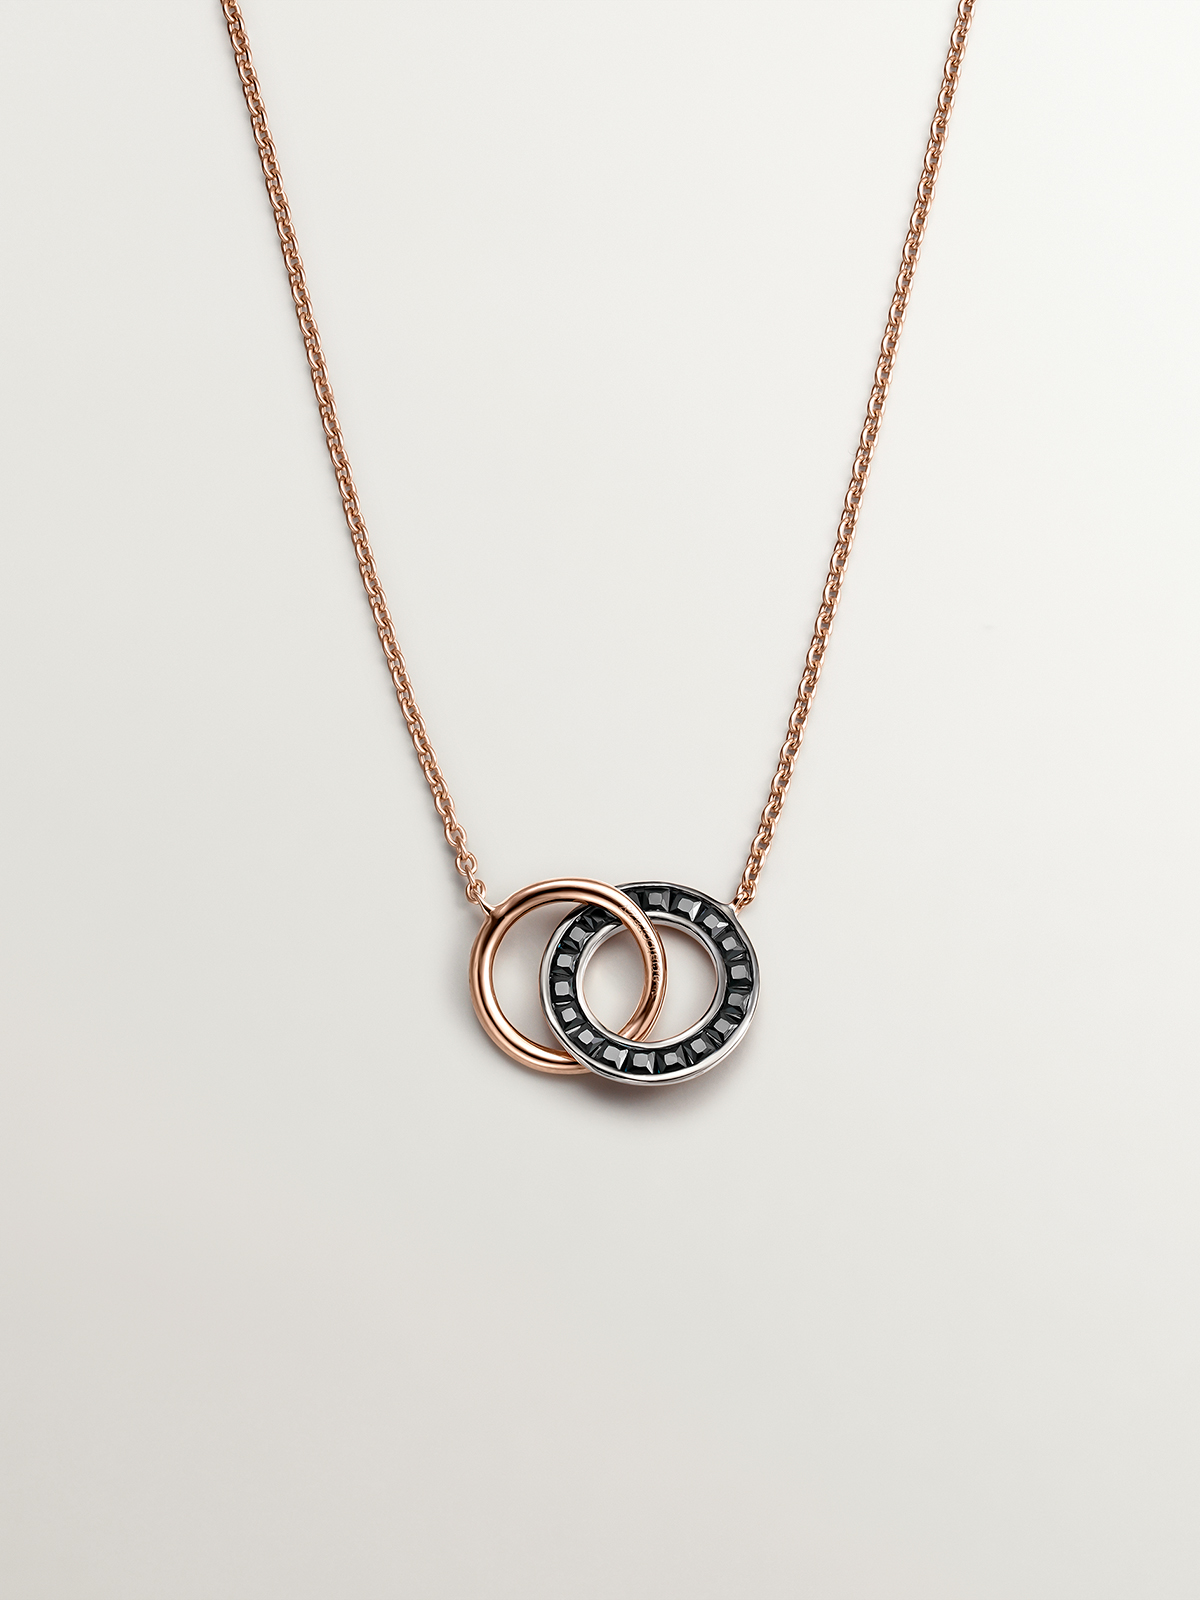 925 Silver pendant bathed in 18K rose gold with circles and black spinels.